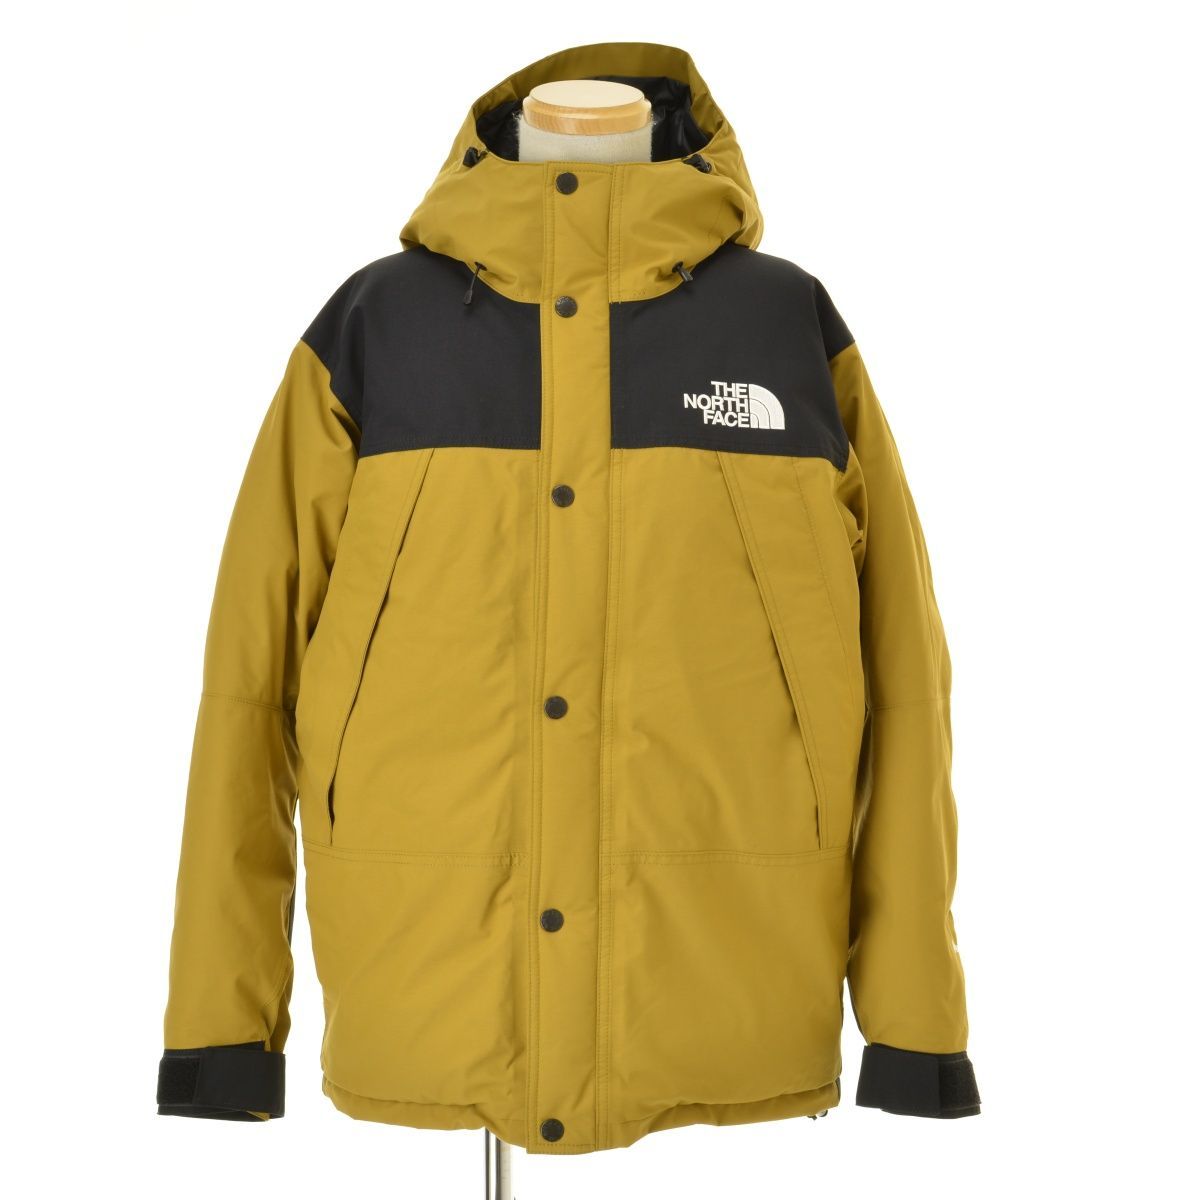 L【THE NORTH FACE】ND91930 Mountain Down Jacket マウンテンダウン ...